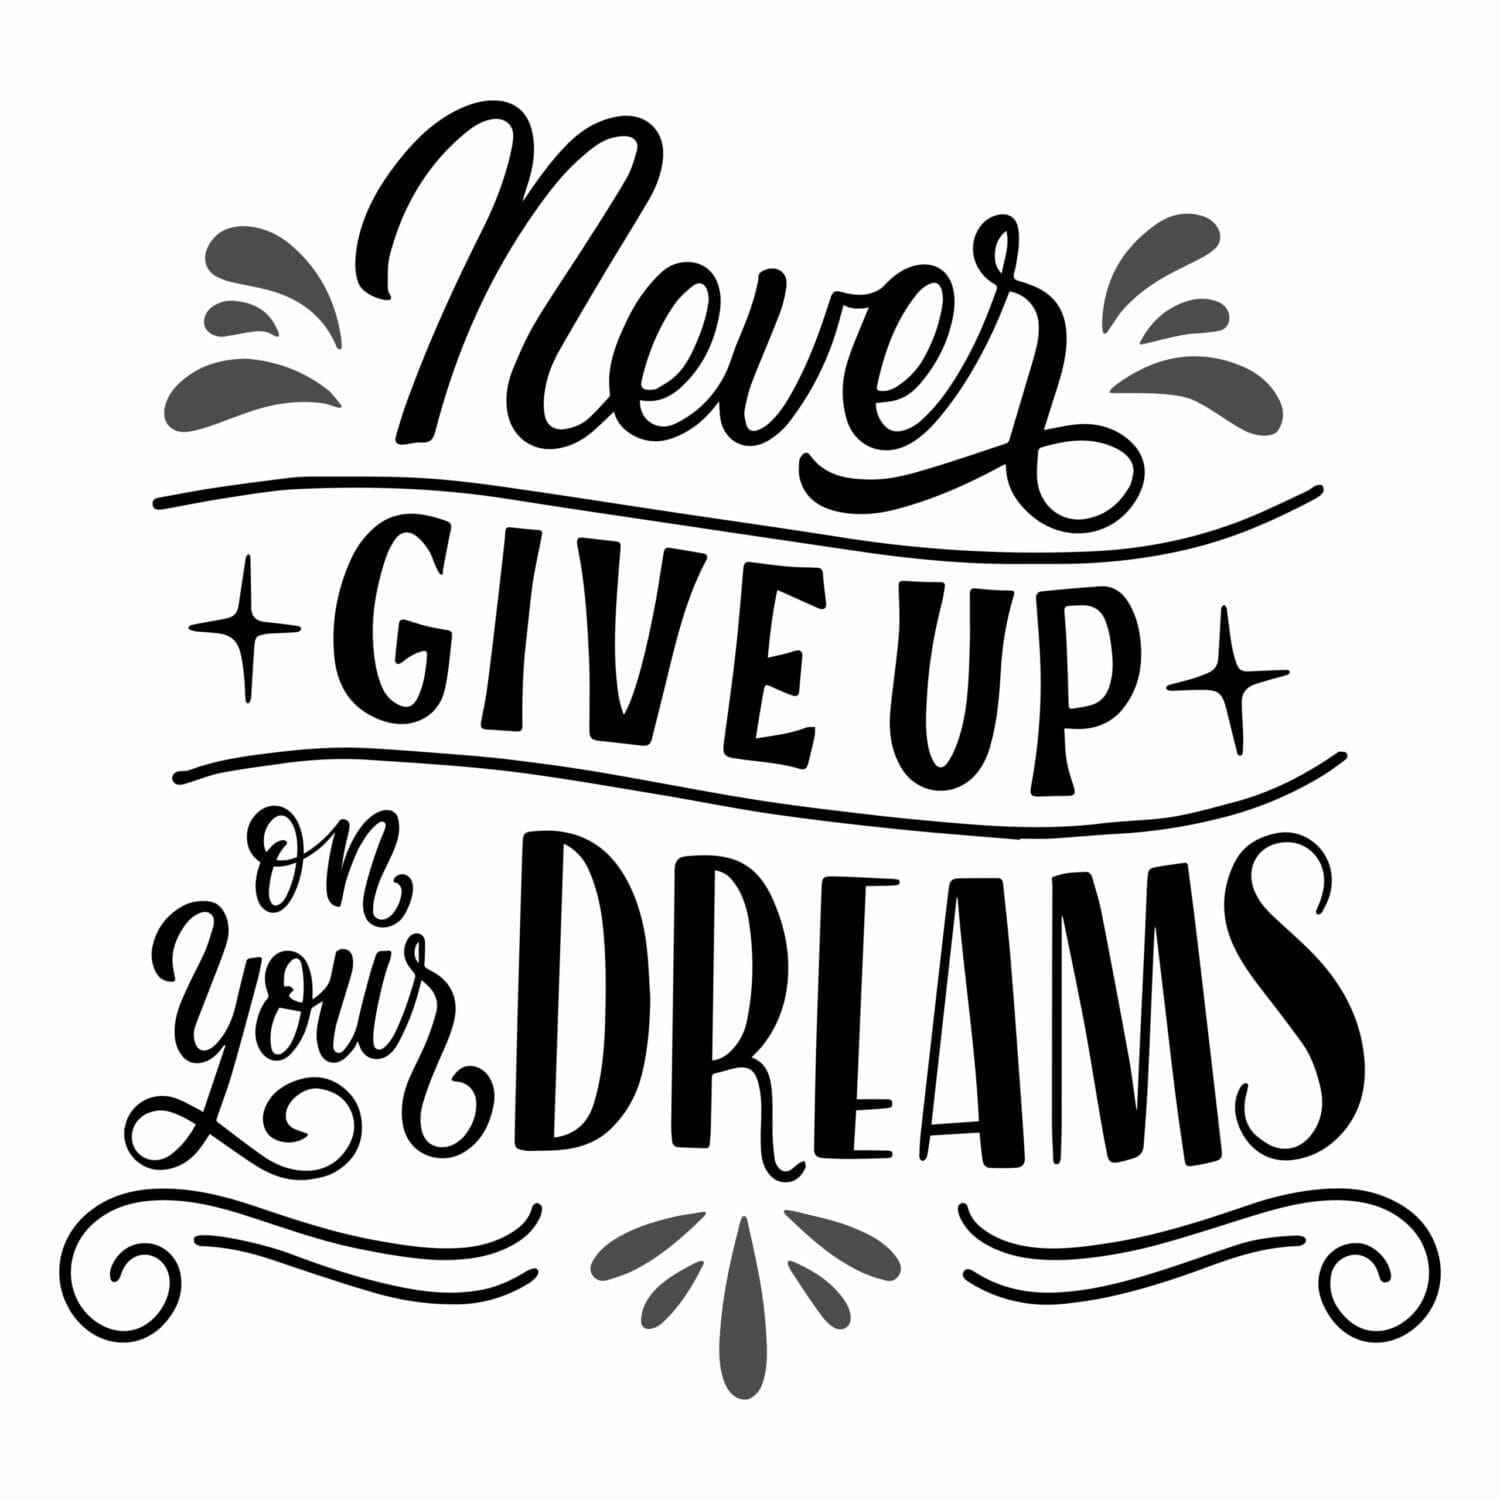 Never-Giveup-on-your-dreams-tshirt-design